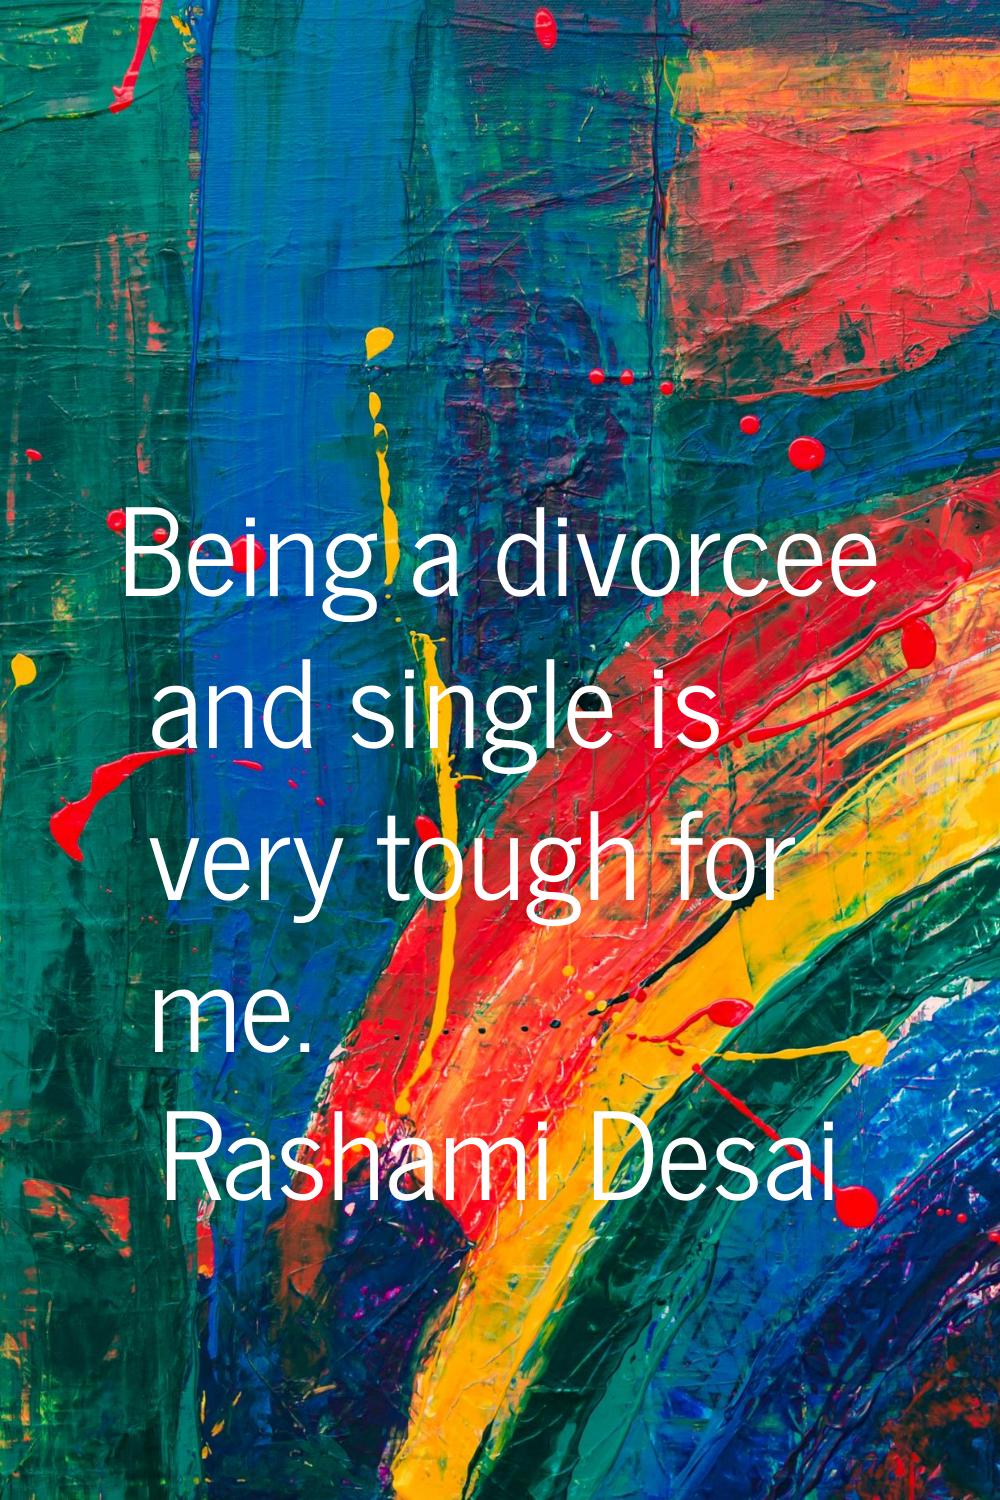 Being a divorcee and single is very tough for me.